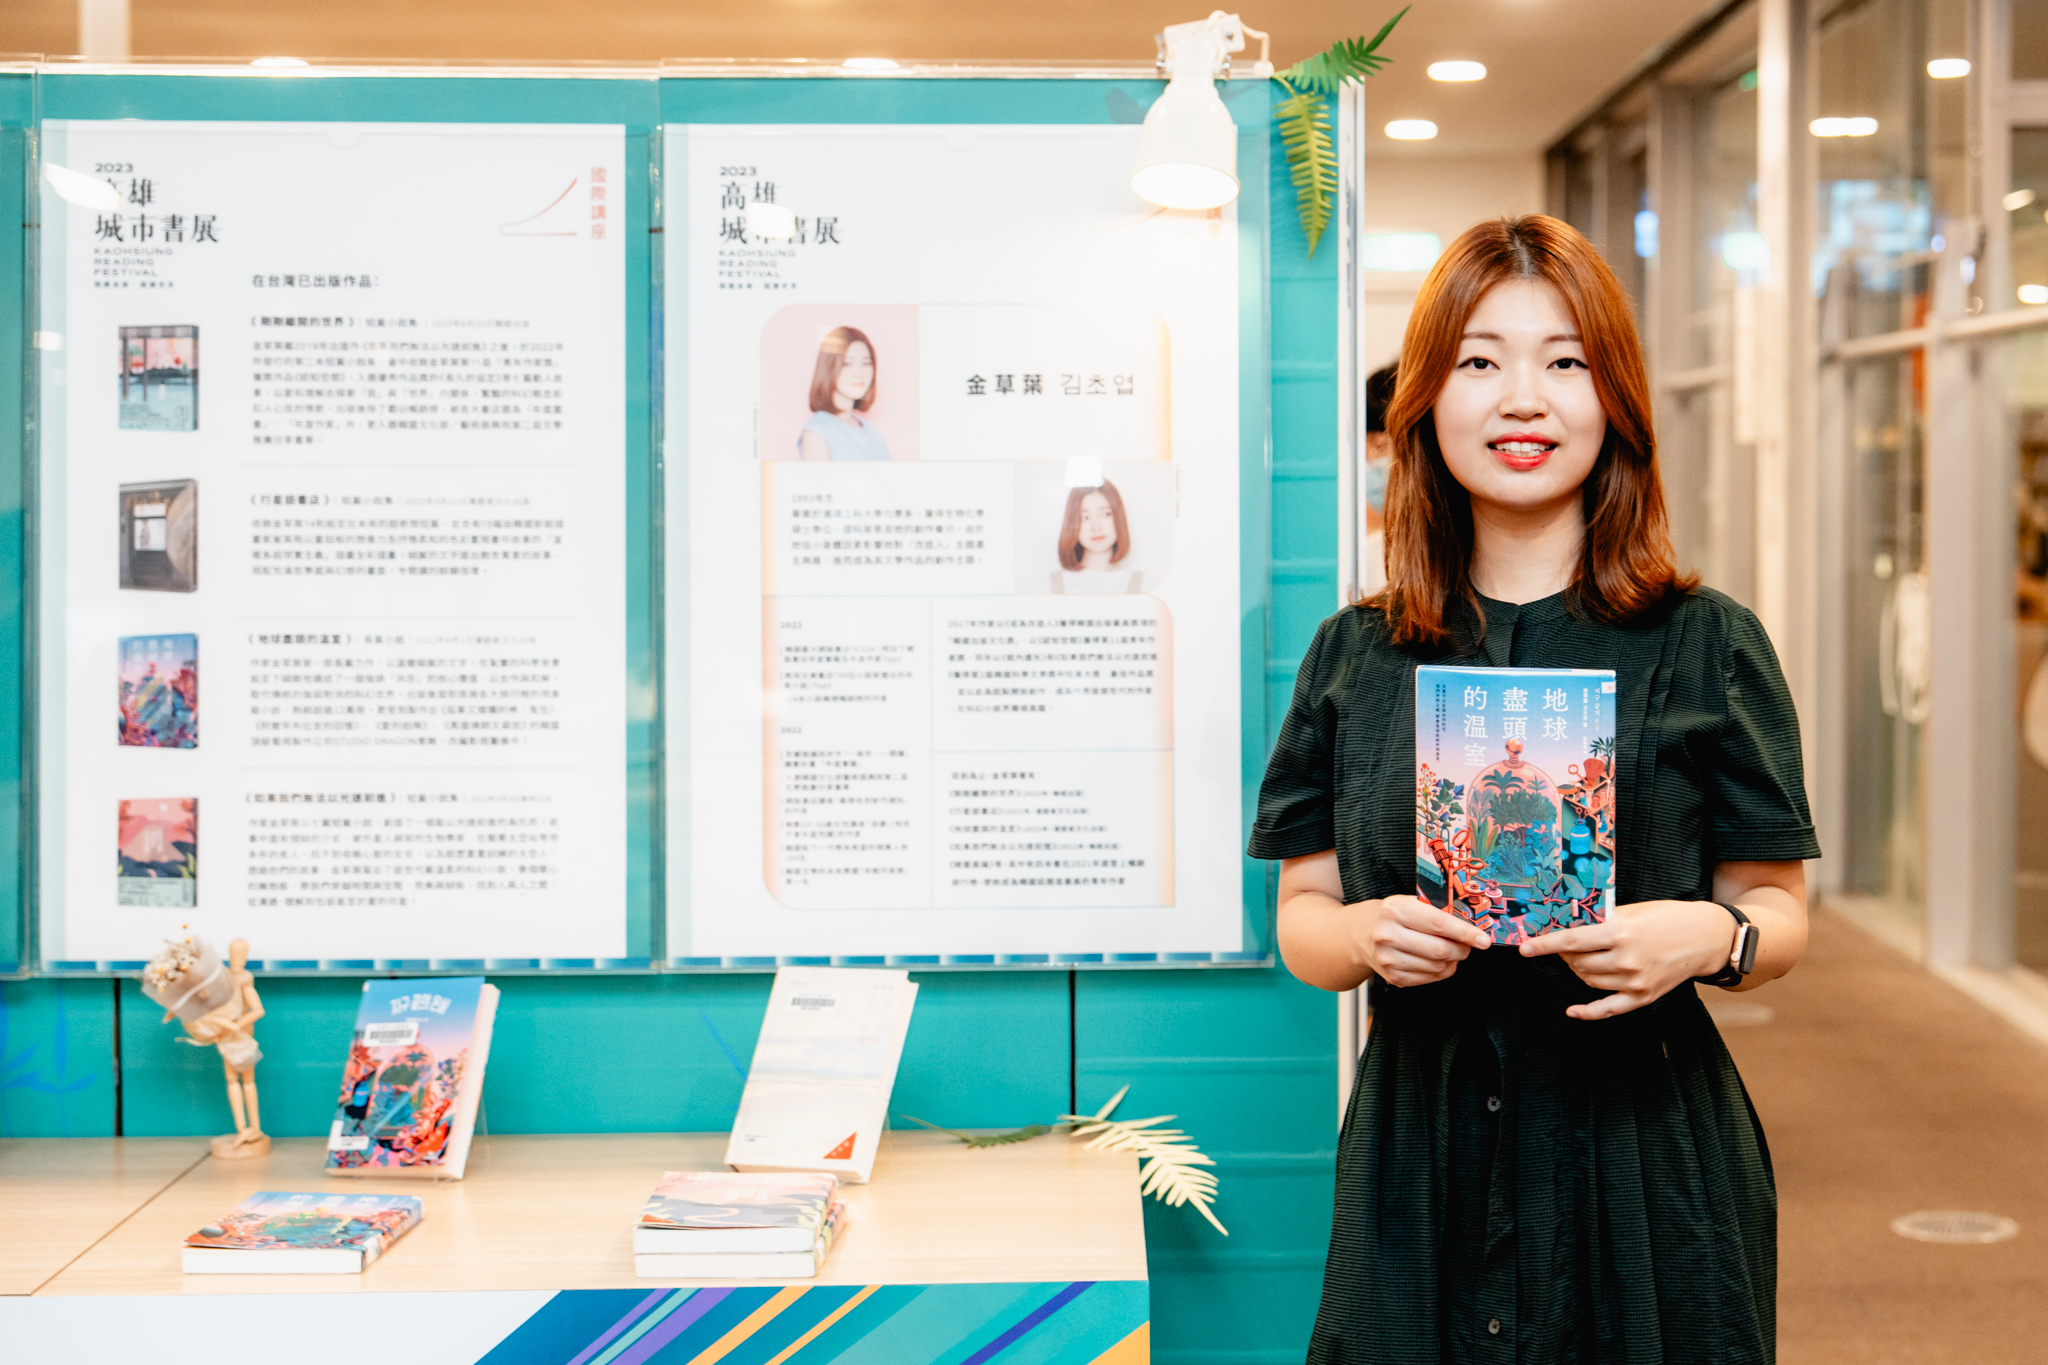 South Korean warm sci-fi author Kim Choyeop posed for a photo in her themed book exhibition area on the 3rd floor of the Main Library.